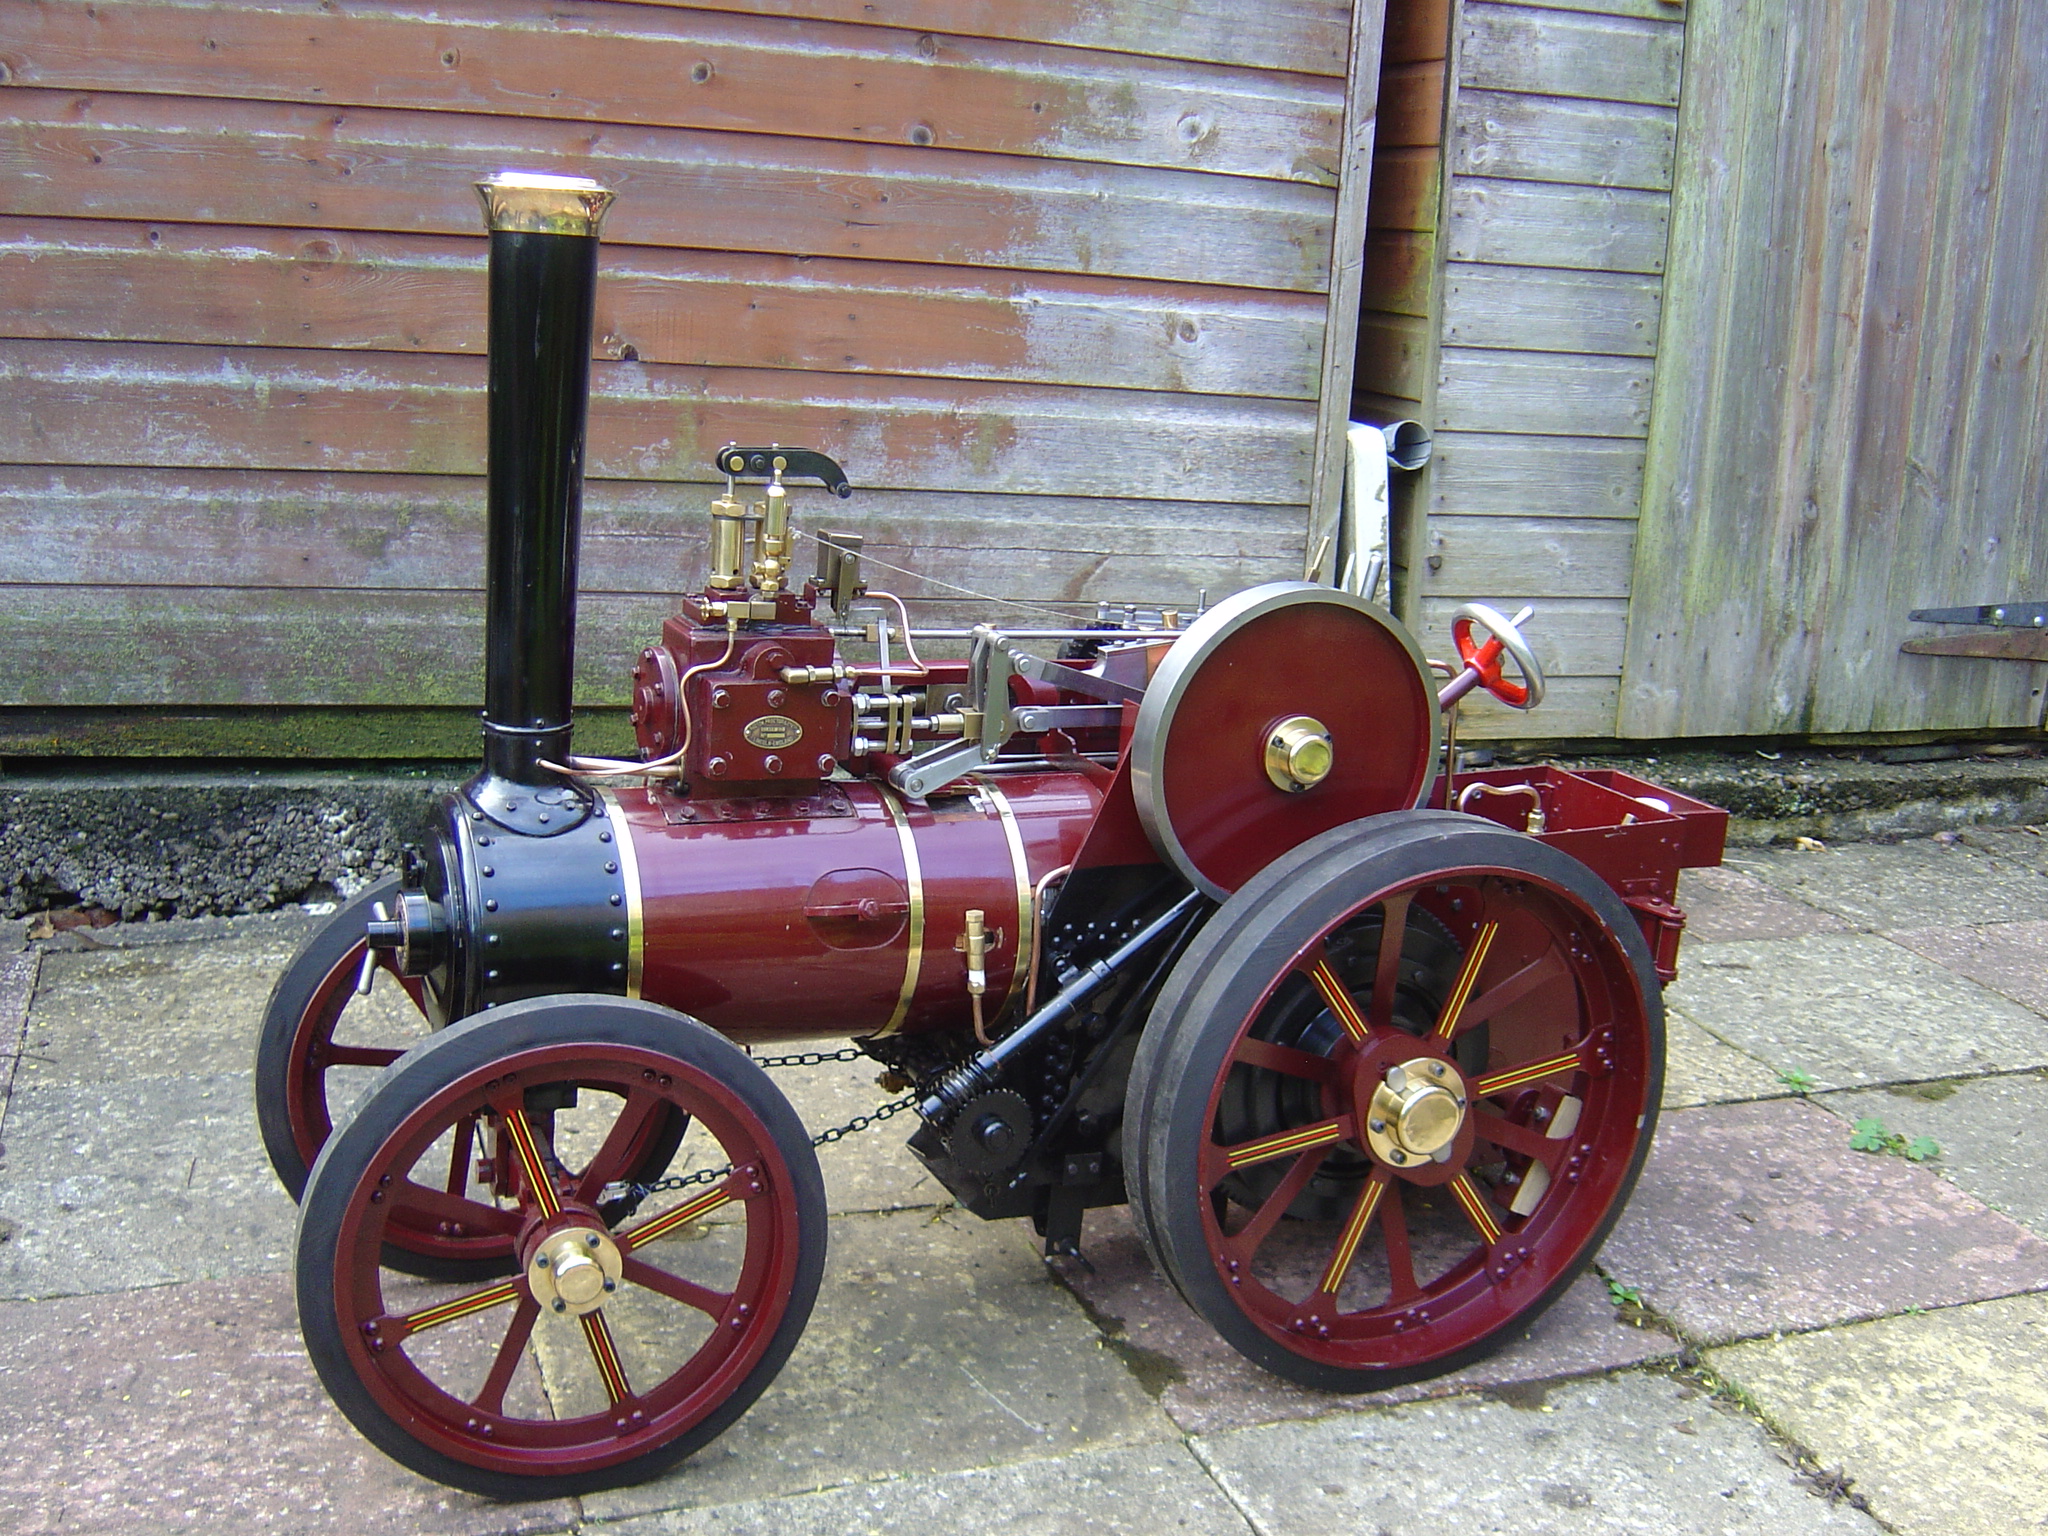 A Four Inch Live Steam Model of a Ruston Proctor Steam Tractor, built from plans and parts from